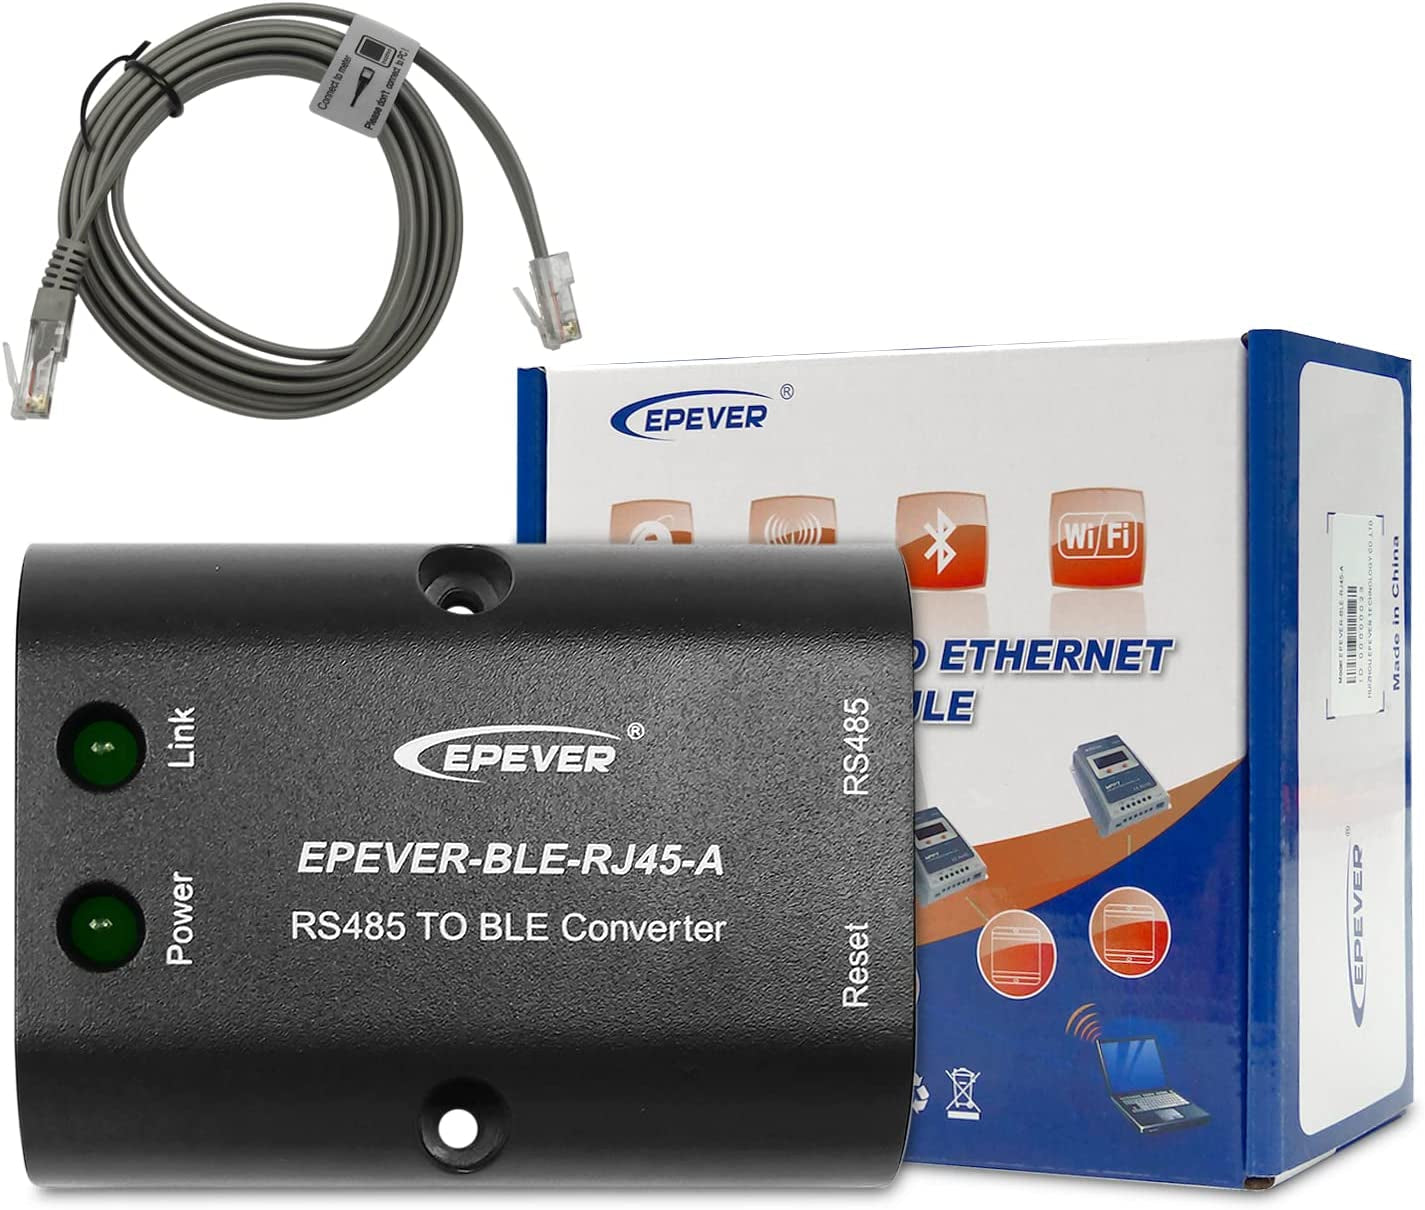 EPEVER, EPEVER-BLE-RJ45-A for MPPT Solar Charge Controller Communication Wireless Monitoring by Mobile Phone APP (EPEVER-BLE-RJ45-A)